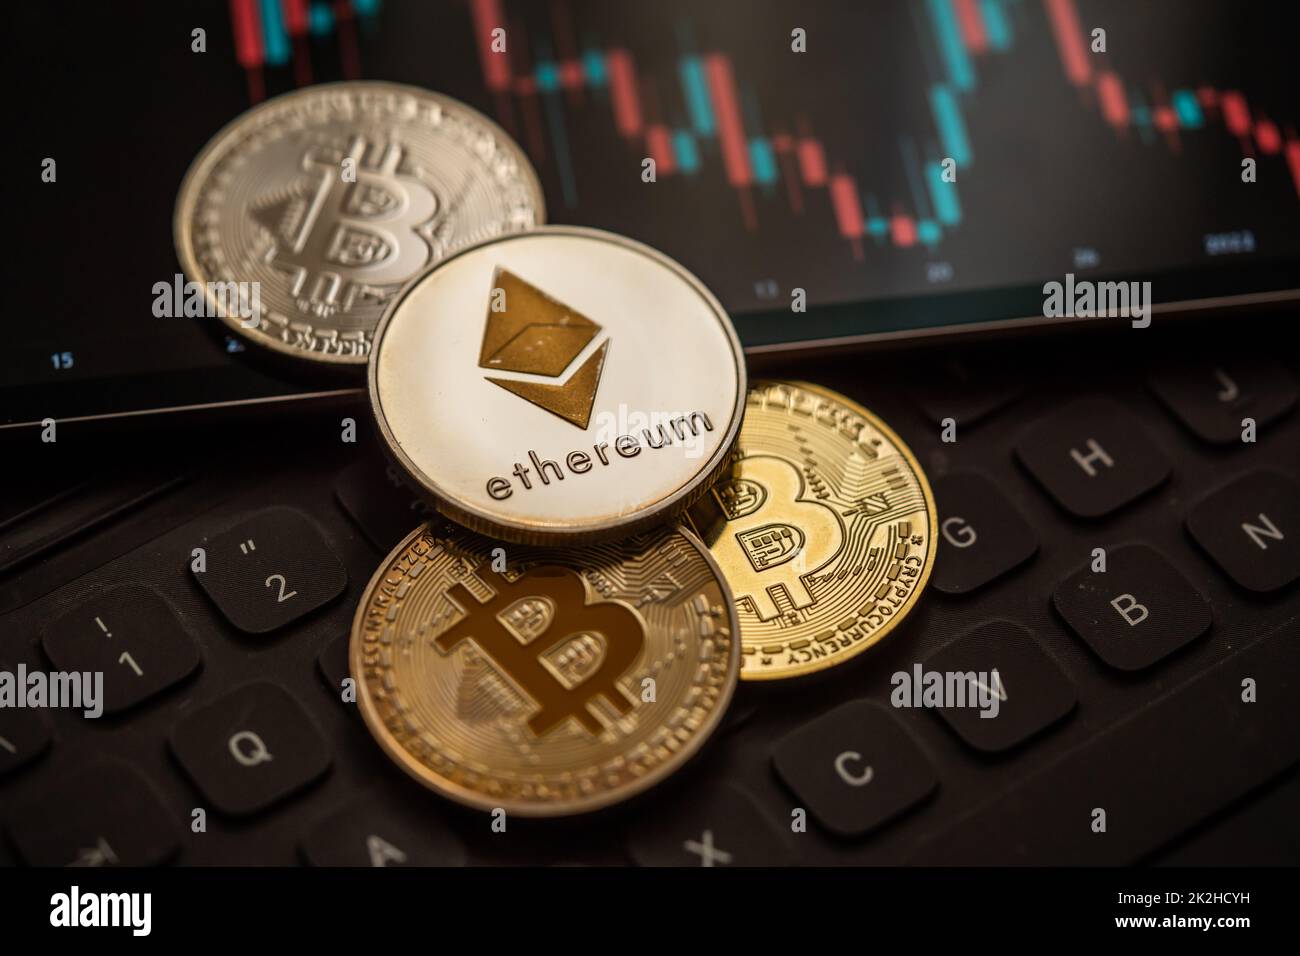 Gold Bitcoin and Ethereum cryptocurrency coins with candle stick graph chart, laptop keyboard, and digital background. Stock Photo